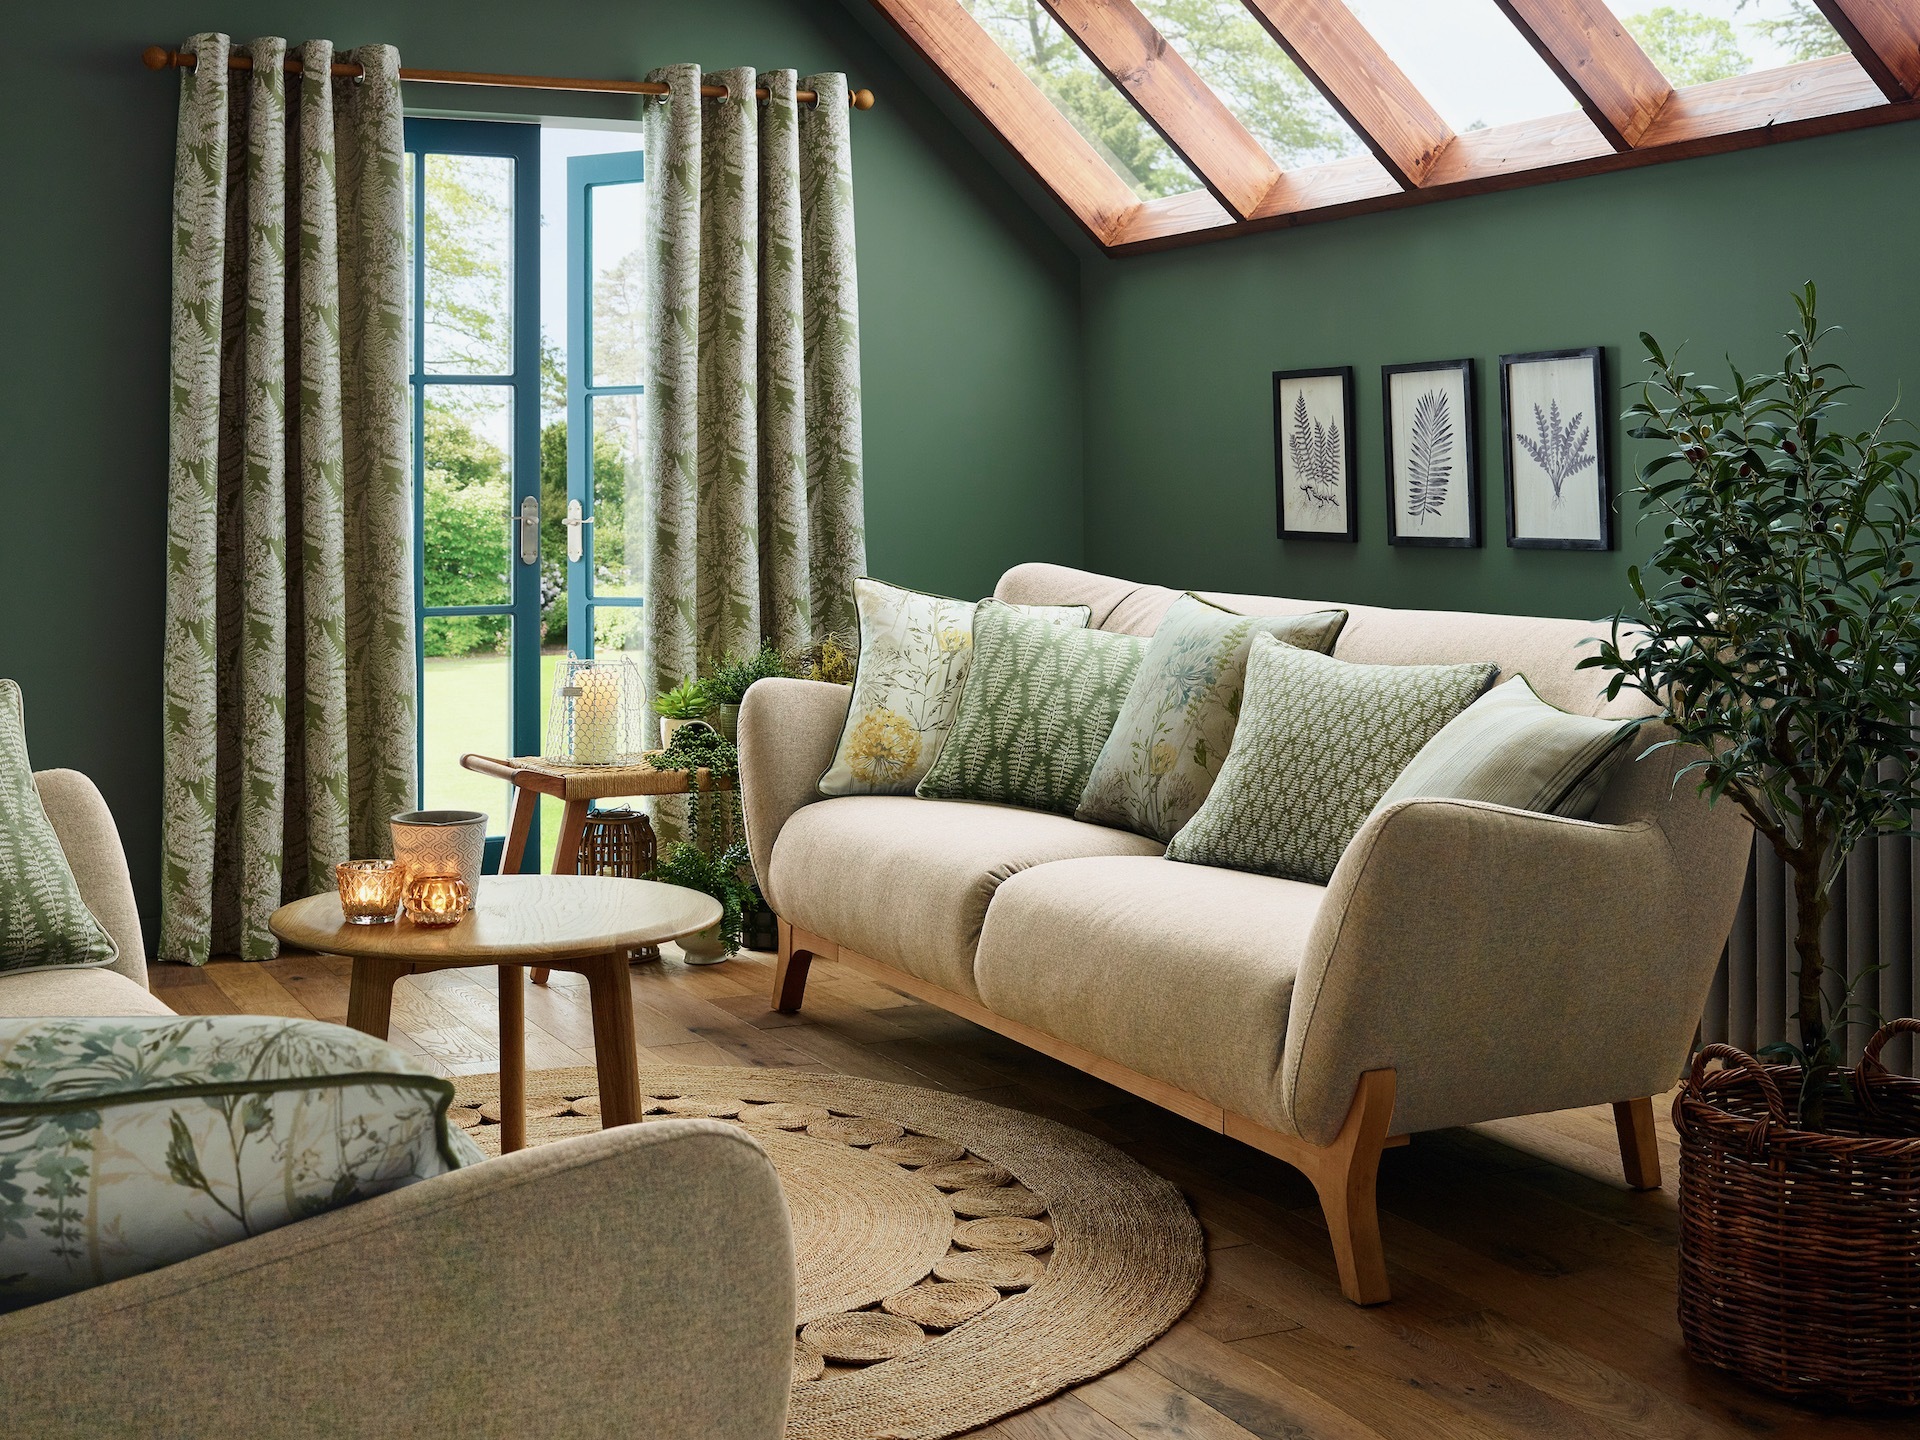 Garden room with green walls, cream sofa and botanical print curtains